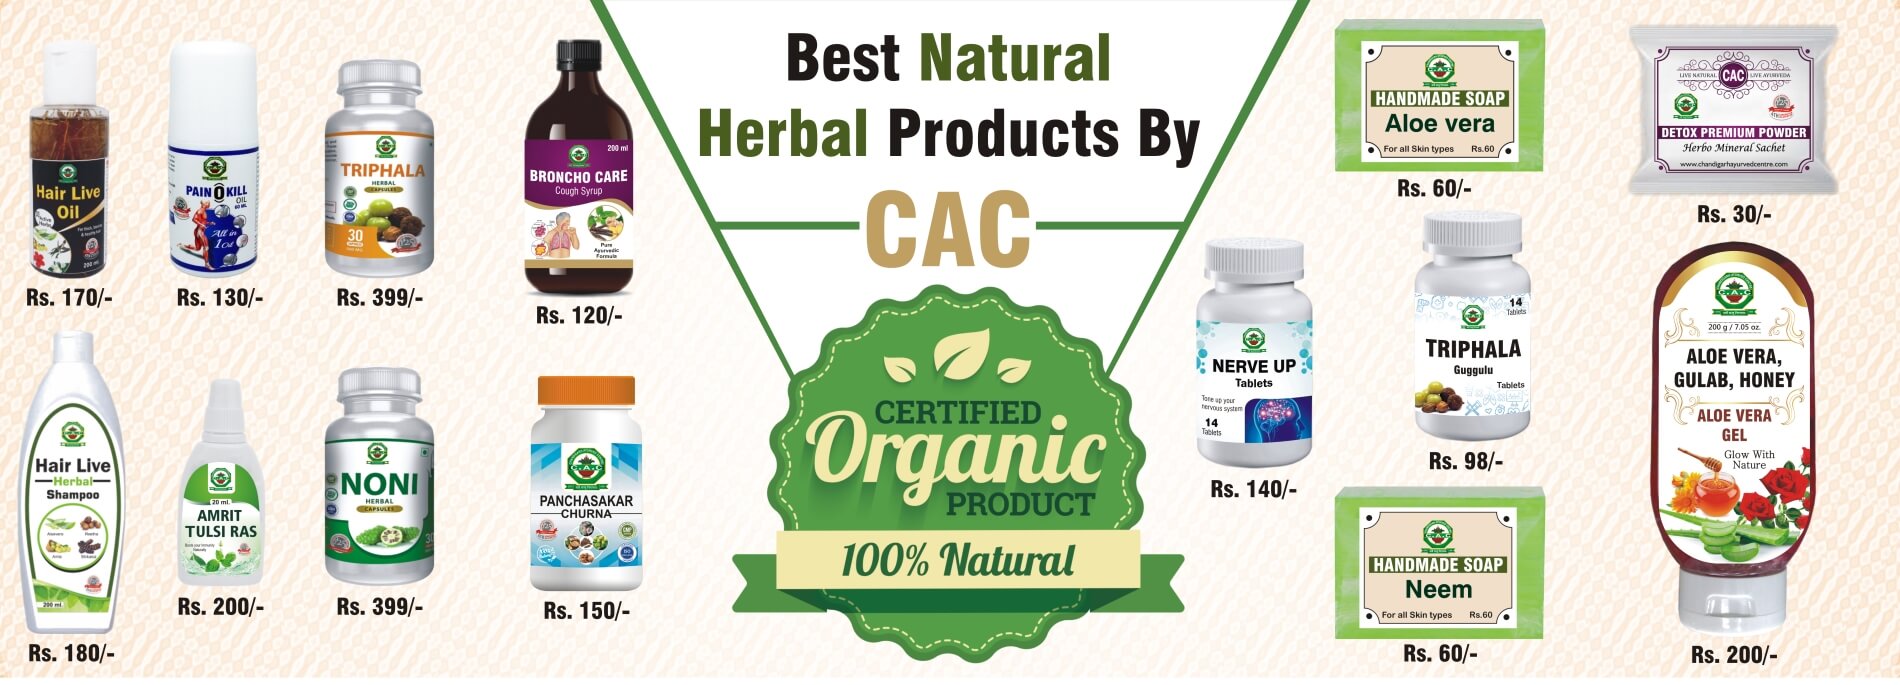 Herbal Products-CAC